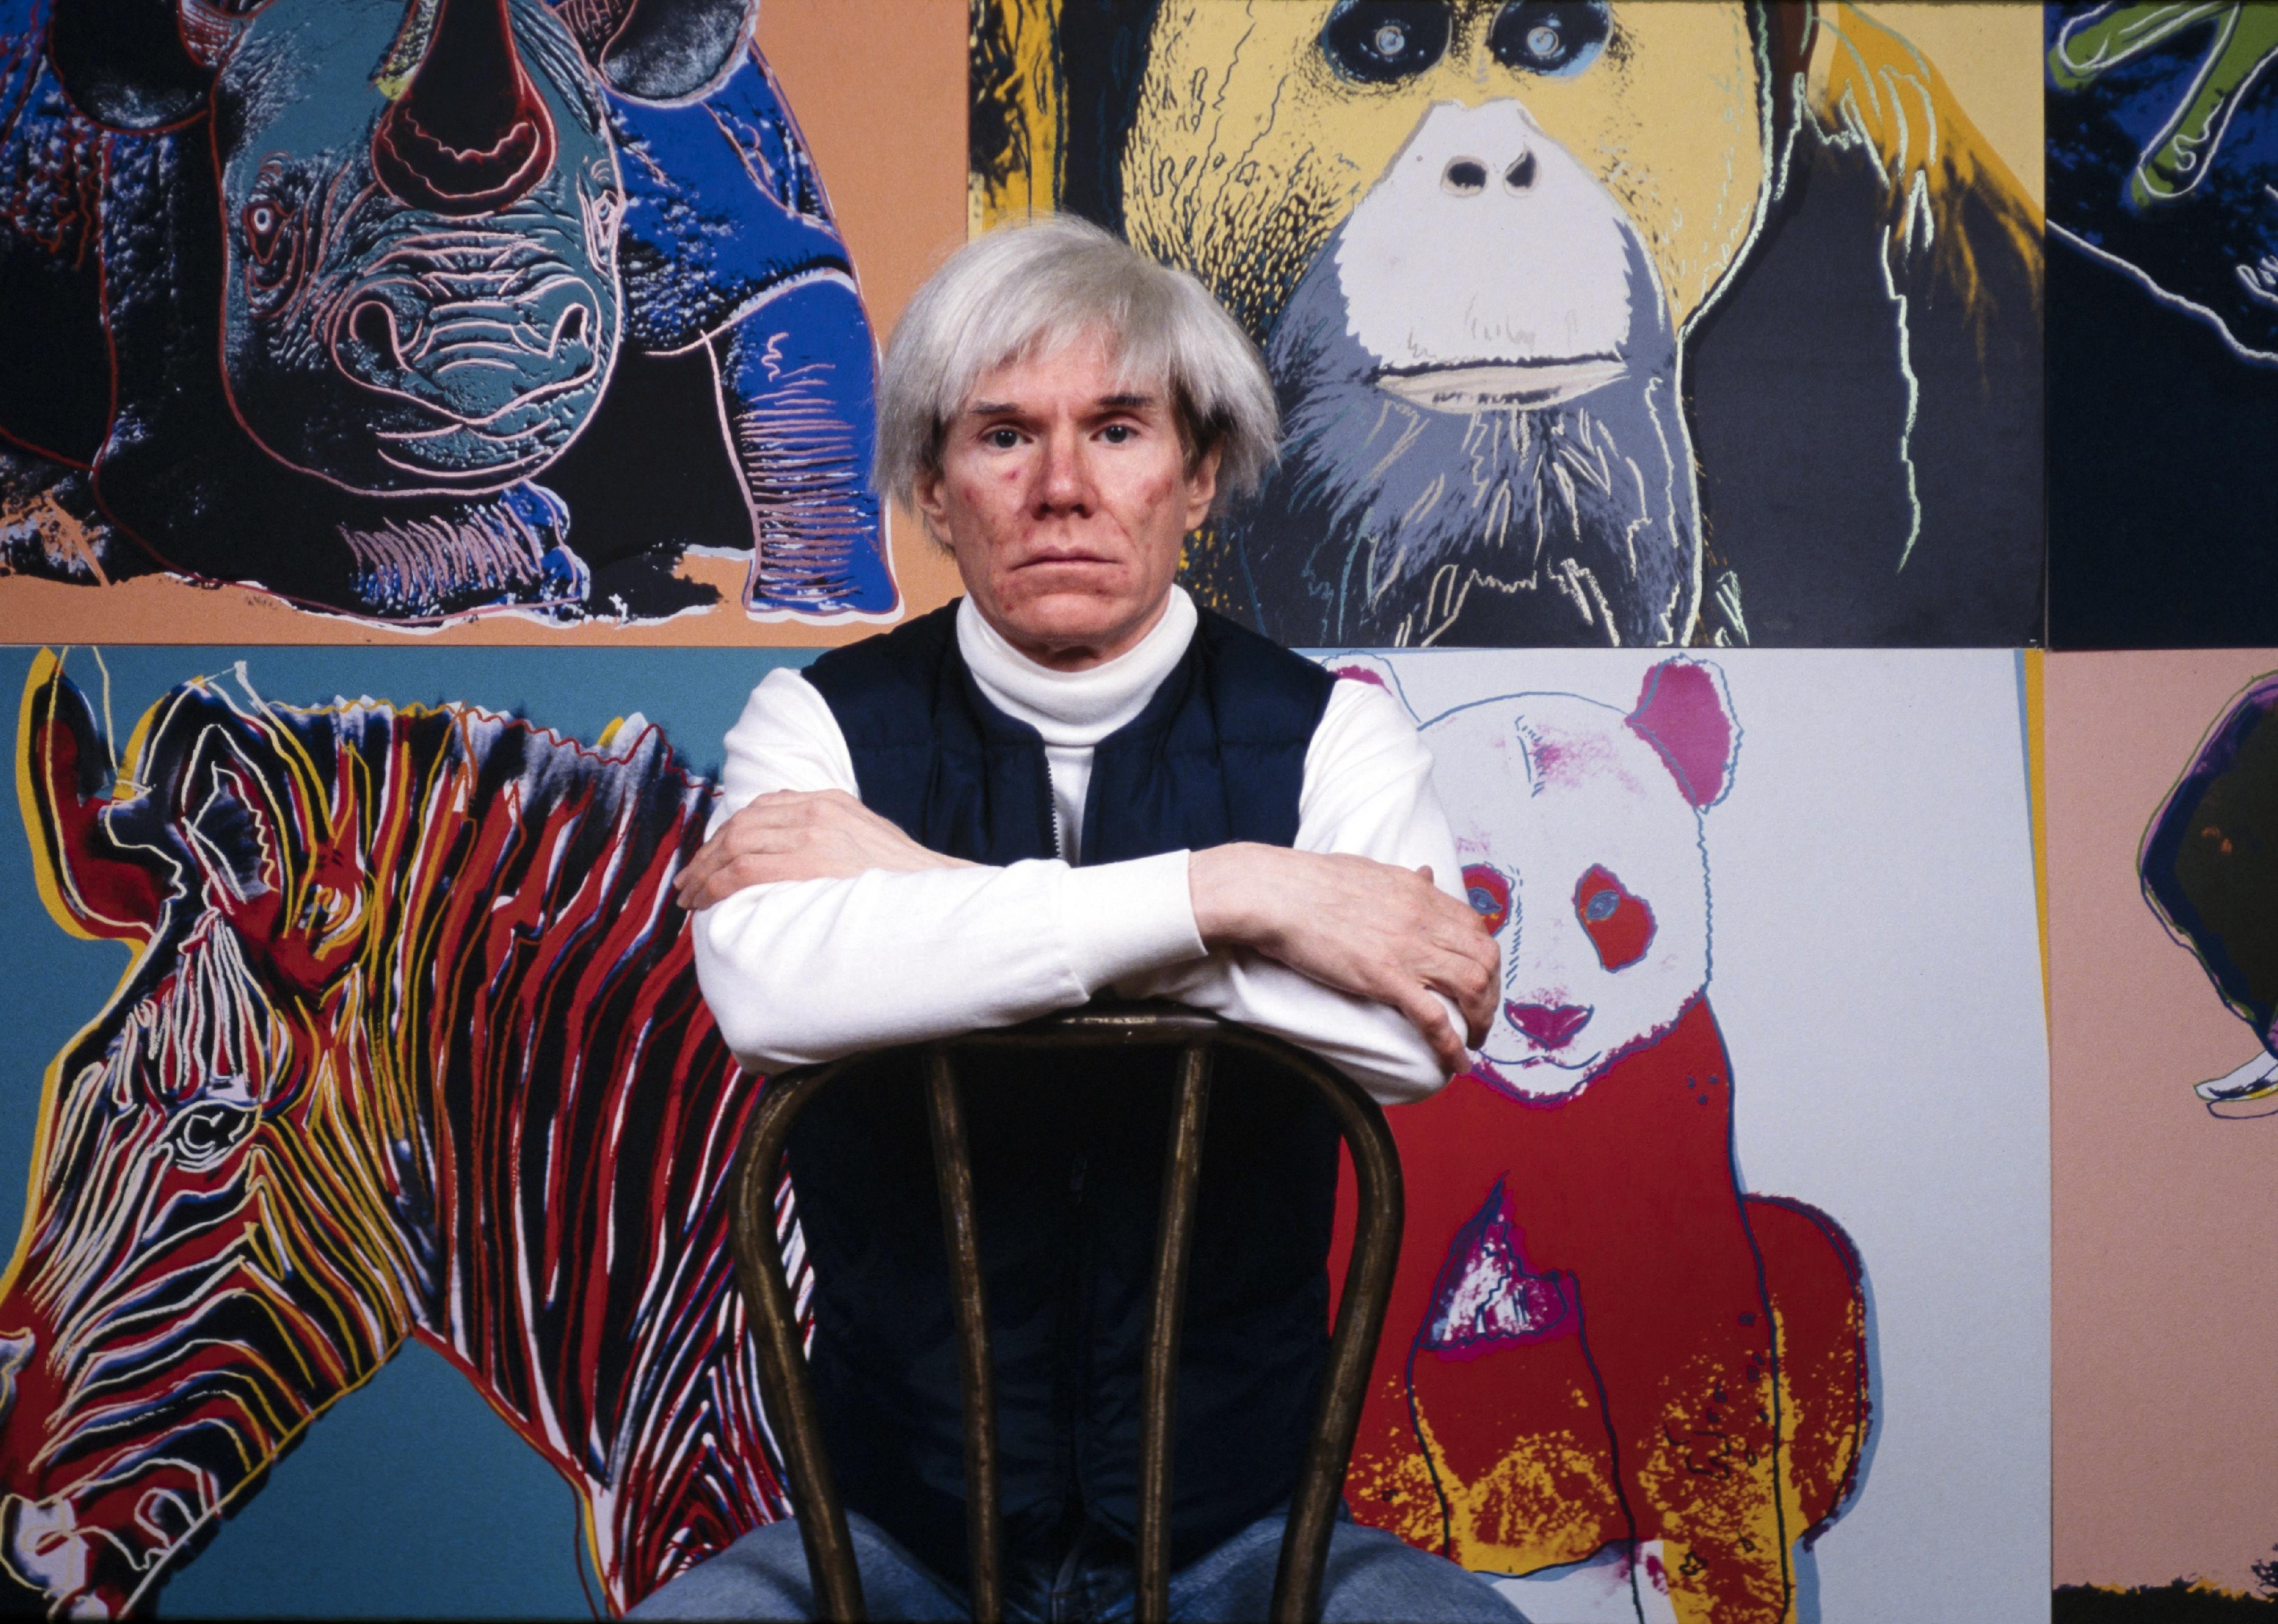  Andy Warhol sits in front of several paintings in his 